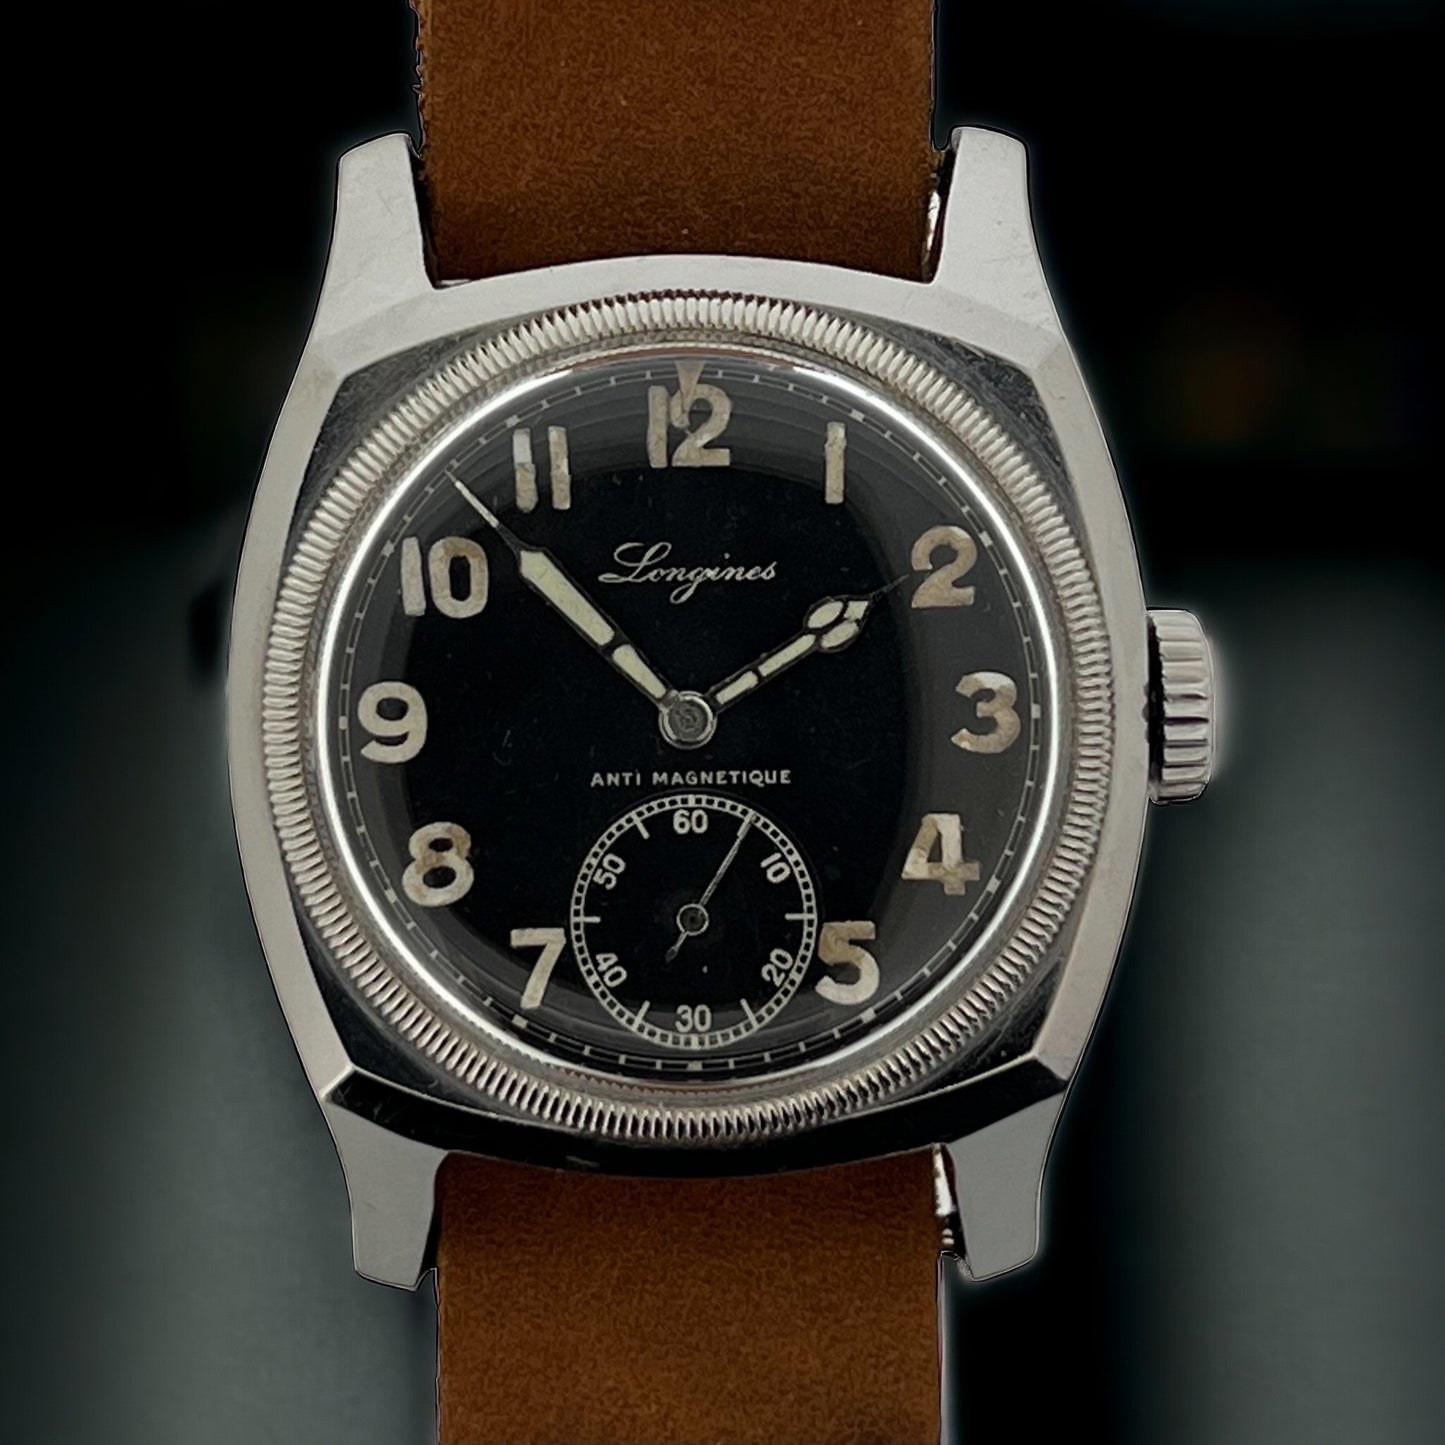 Longines Majetek Big Turtle Military Version for the Czech Army with Archives extract Mint'